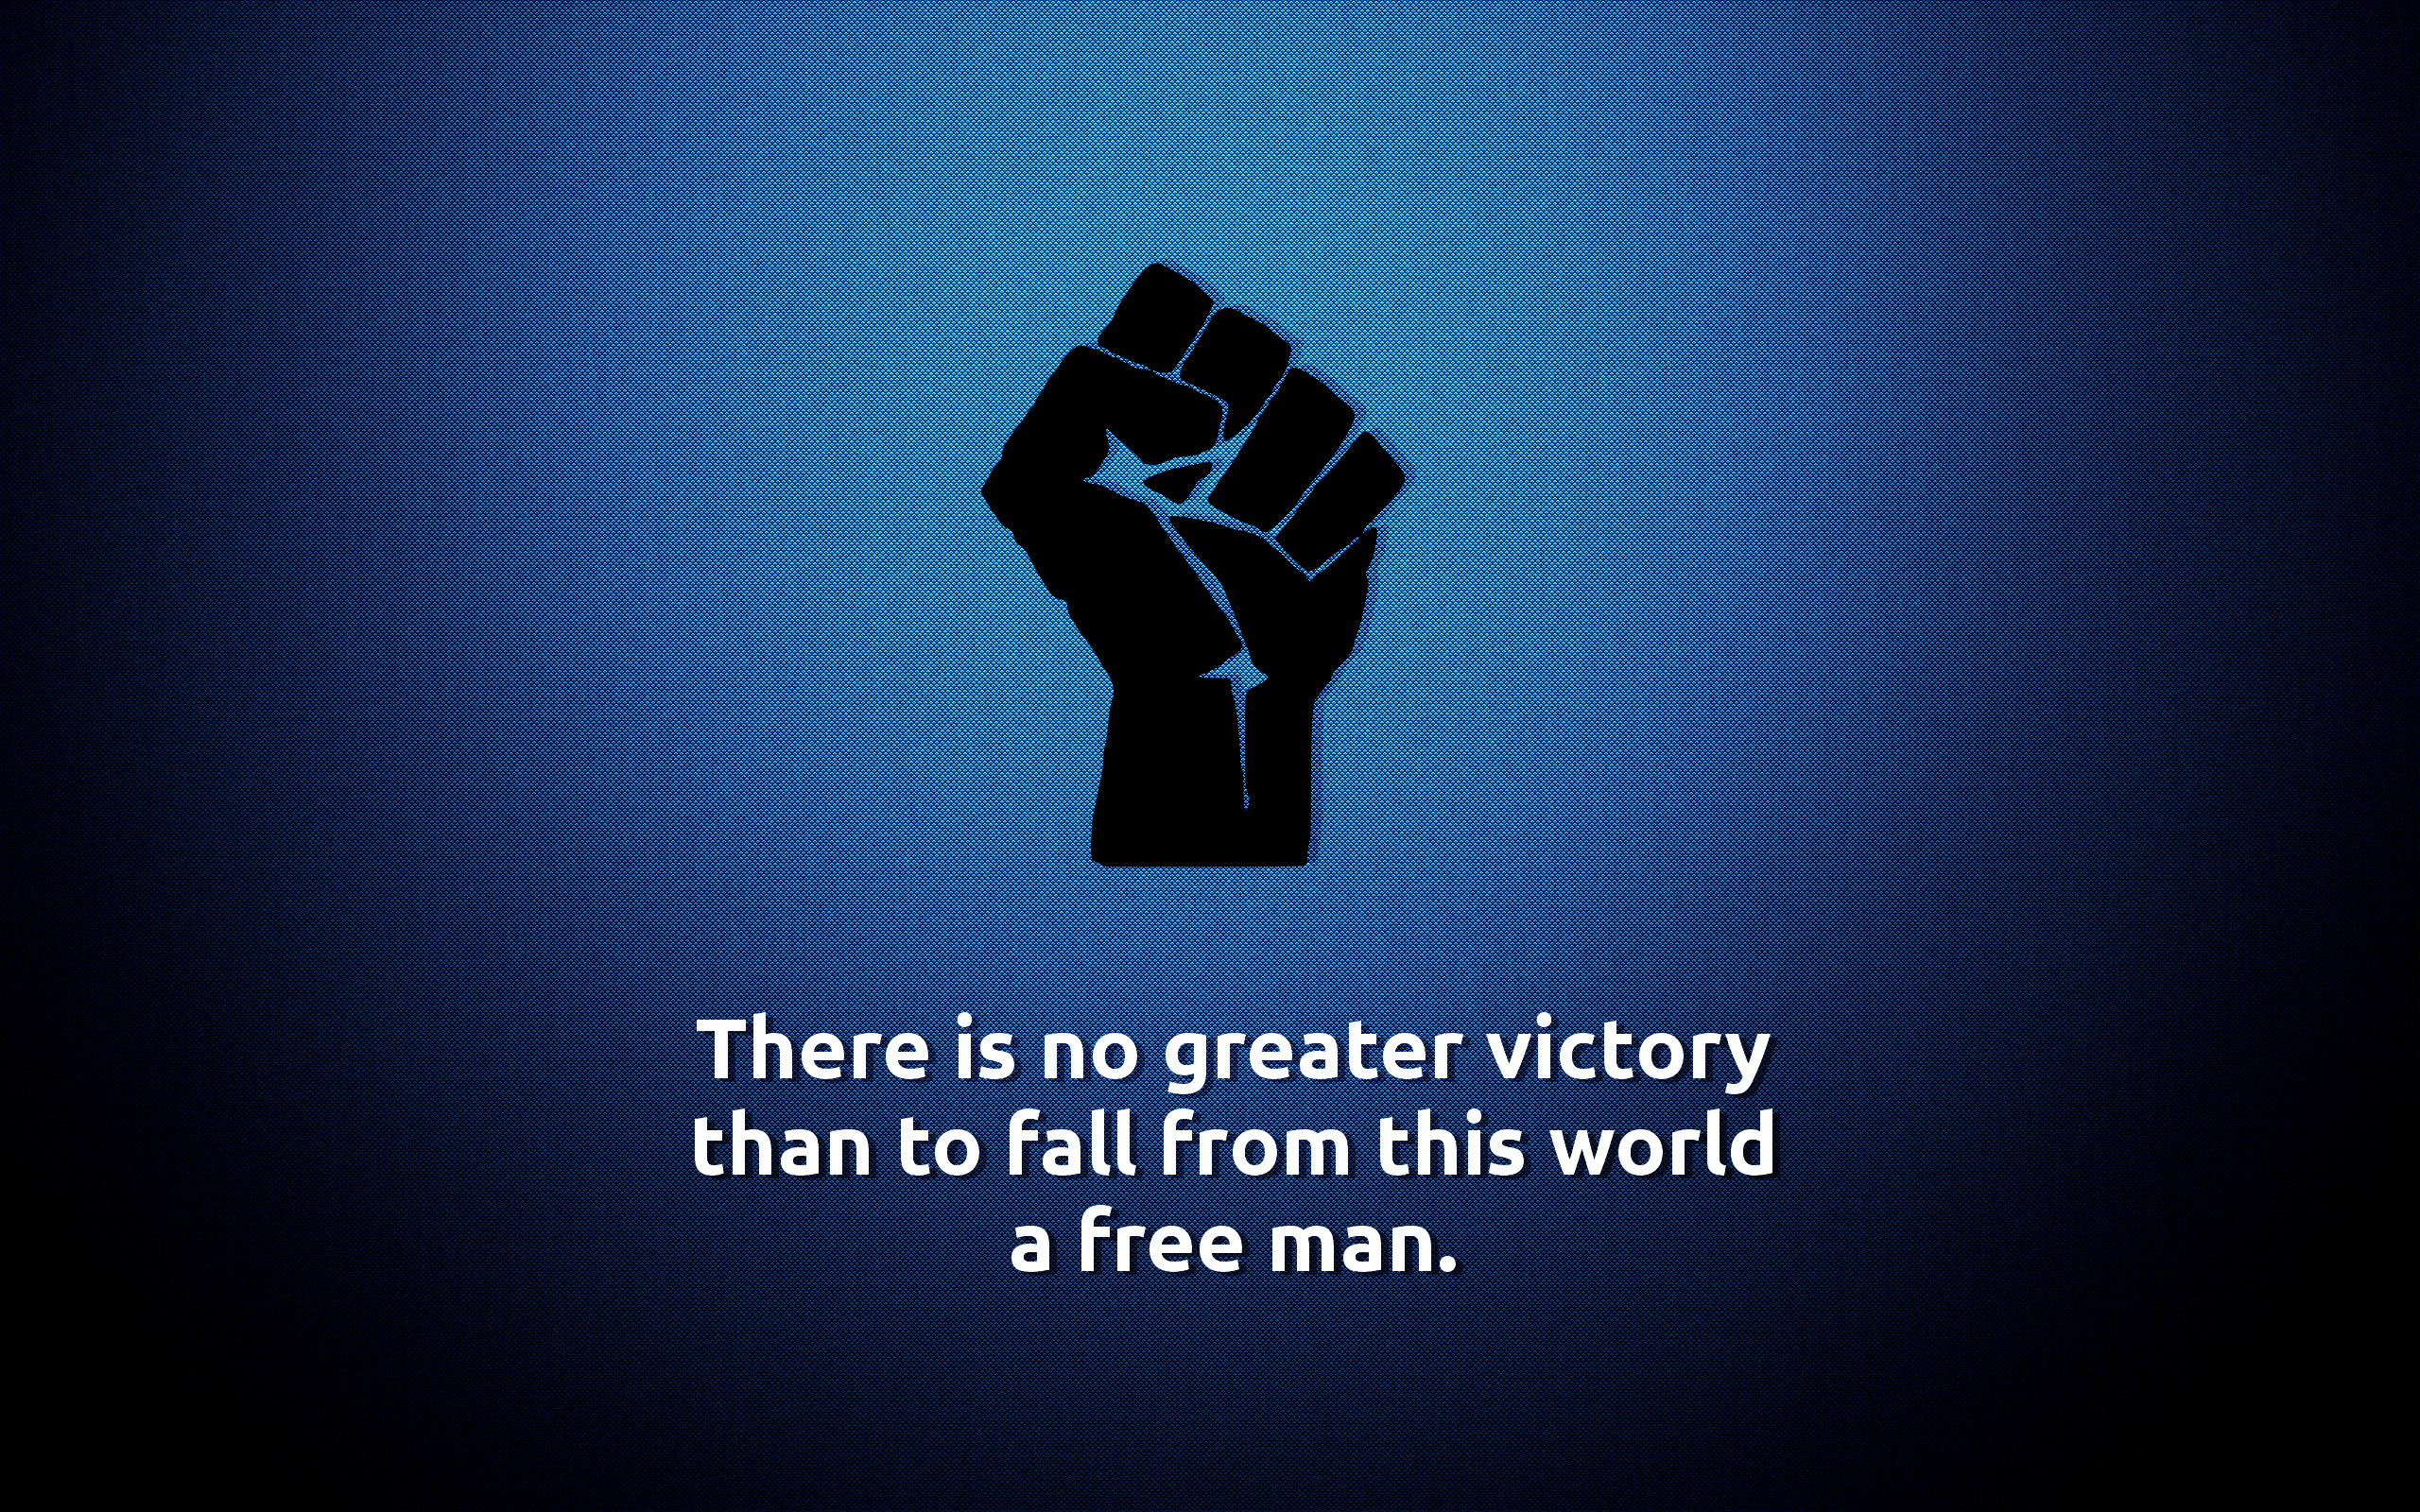 2560x1600 There is no greater victory Computer Wallpapers, Desktop .